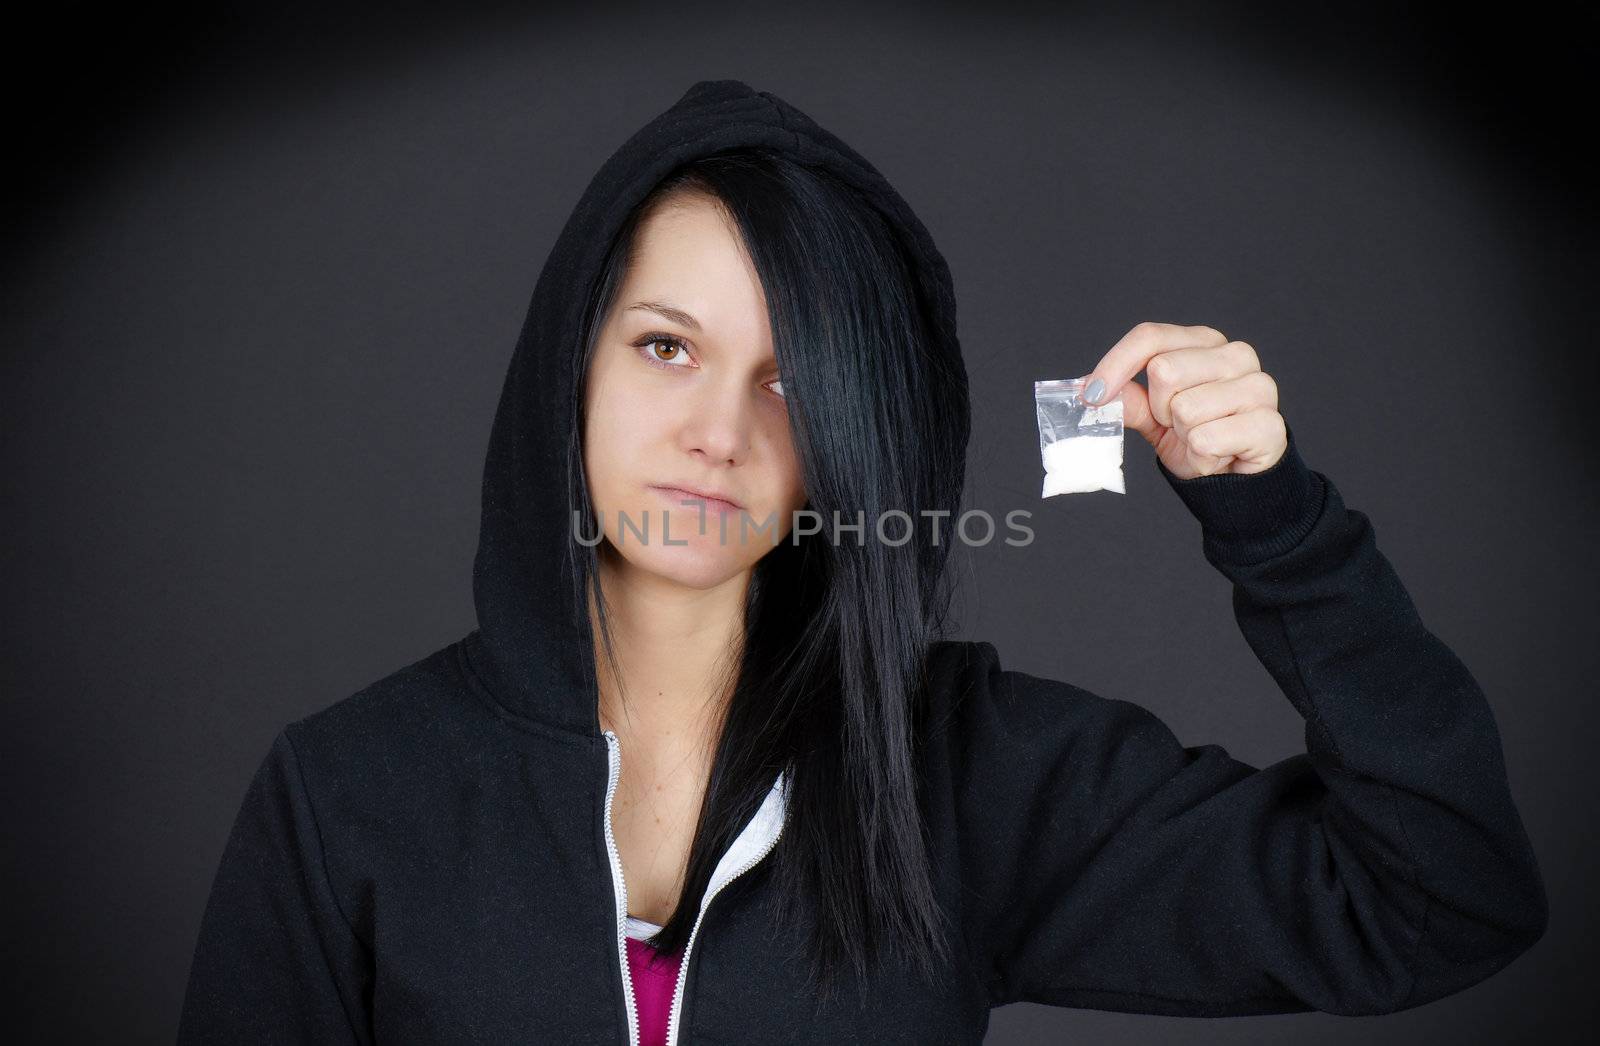 Gloomy portrait of a young woman or teen addict looking sad showing her little bag of drugs.